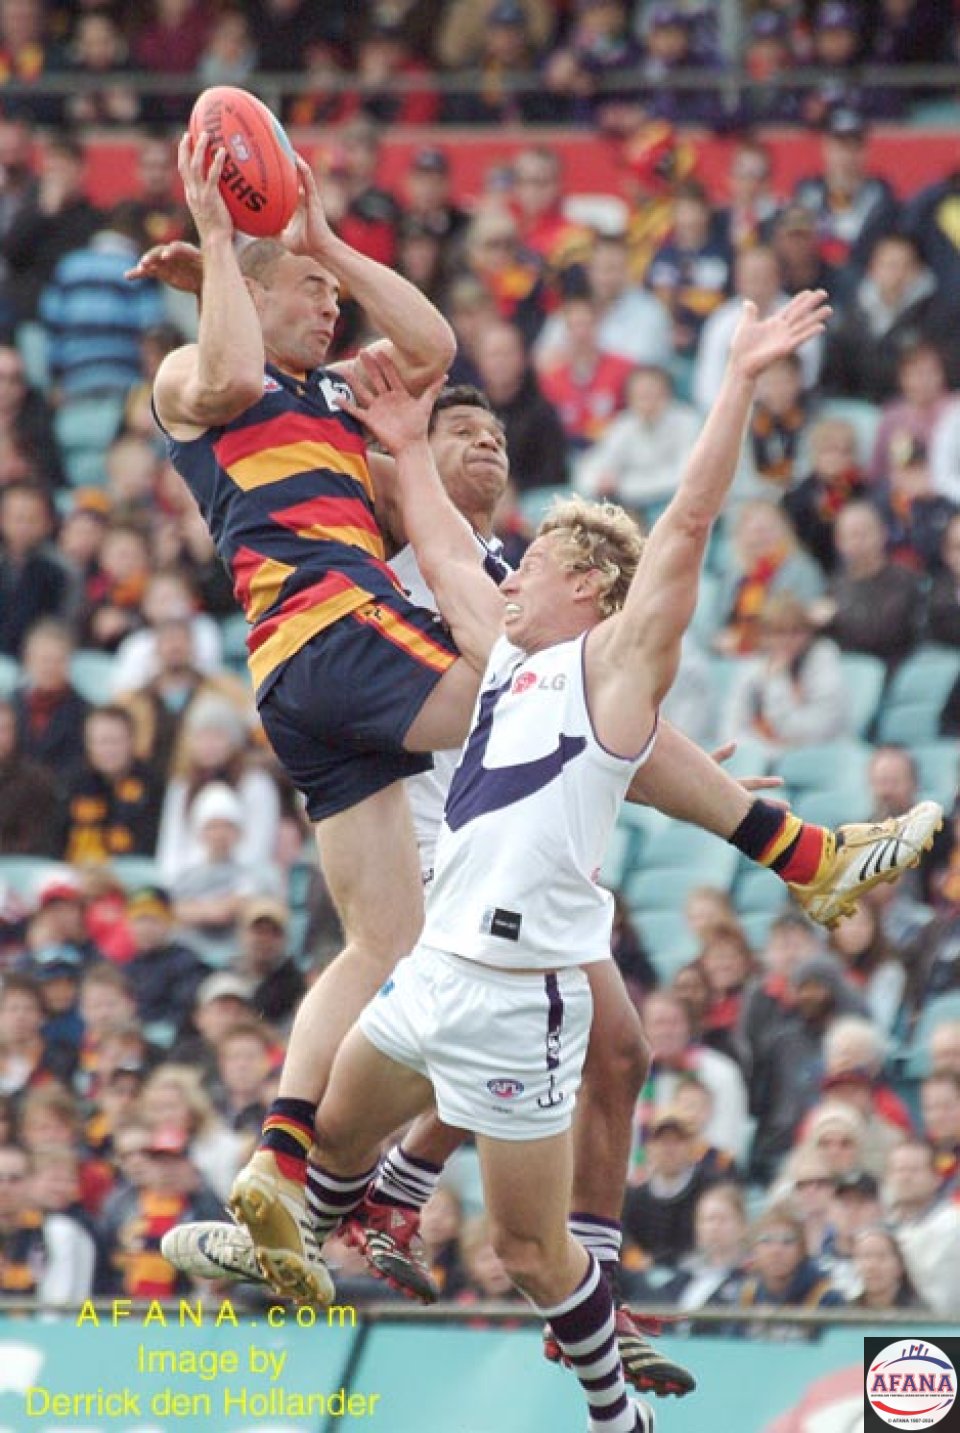 [b]A spectacular and courageous mark from Crows stallwart Jason Torney[/b]